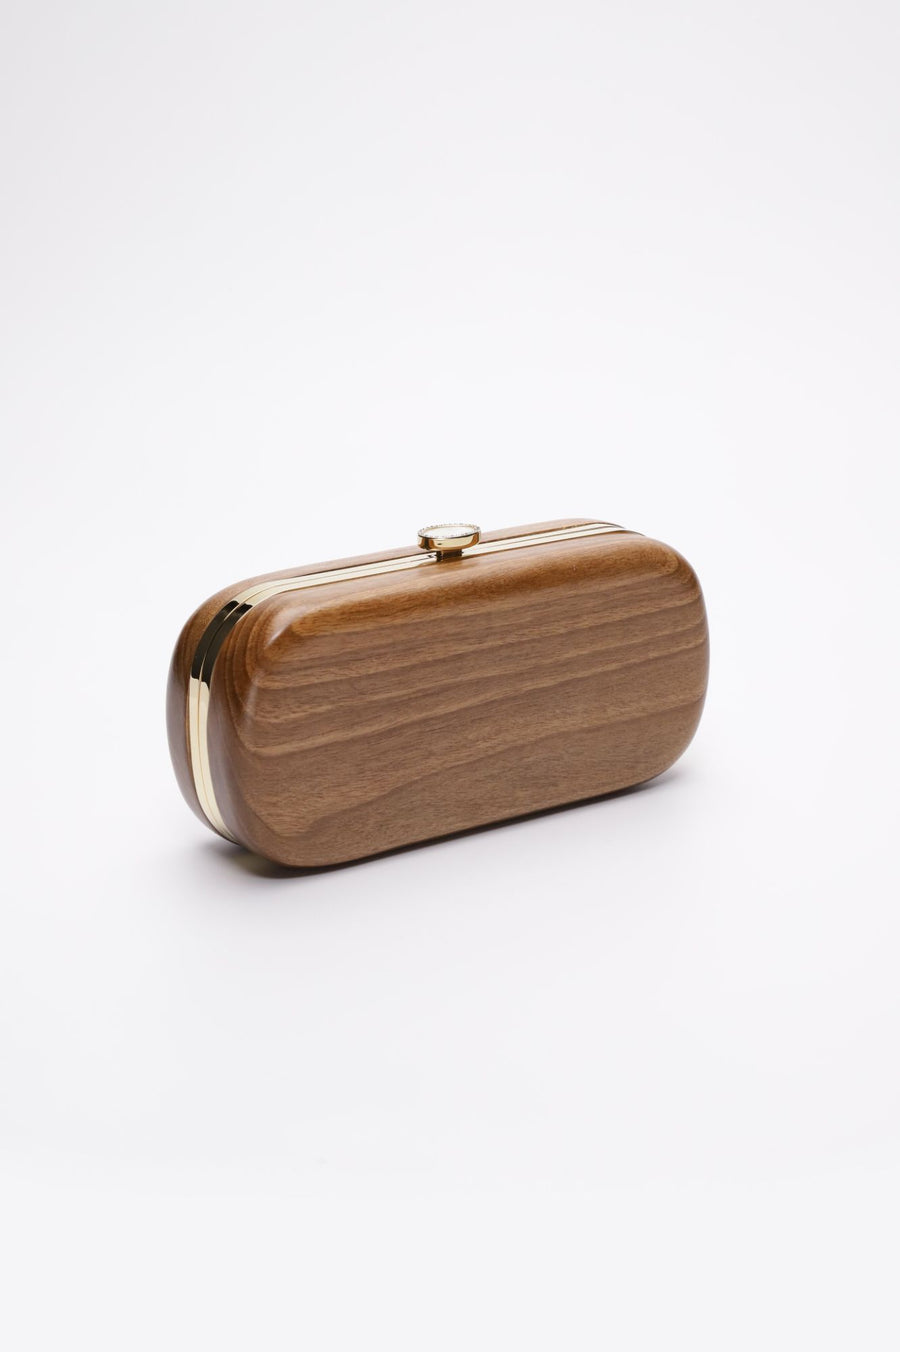 Bella Clutch with gold hardware frame in a solid Walnut Wood body.